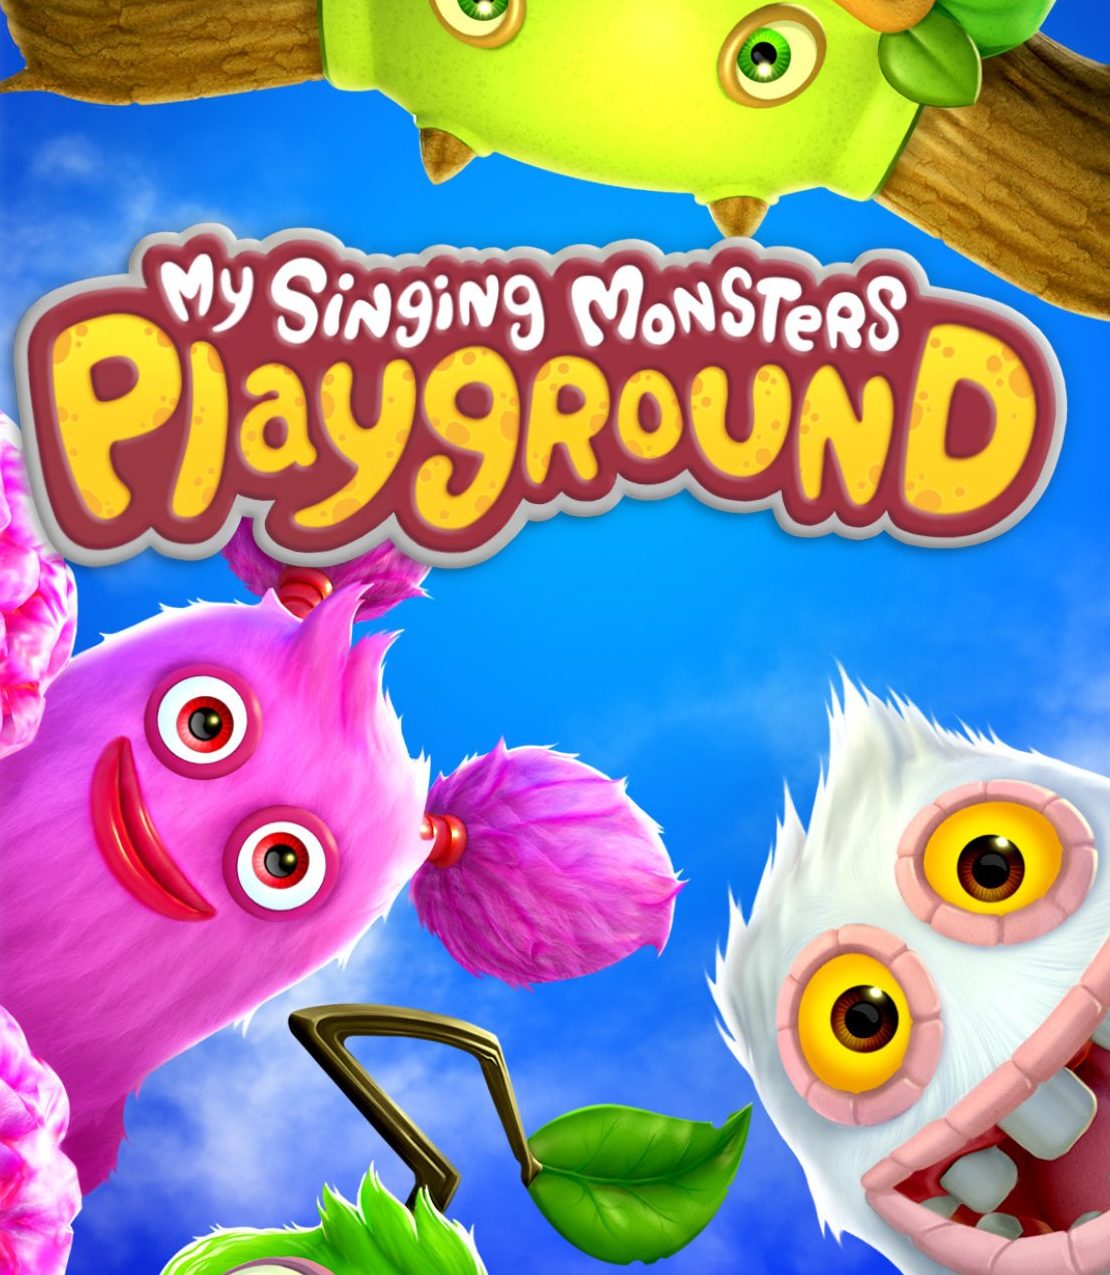 My Singing Monsters Playground in arrivo su console - Satyrnet.it